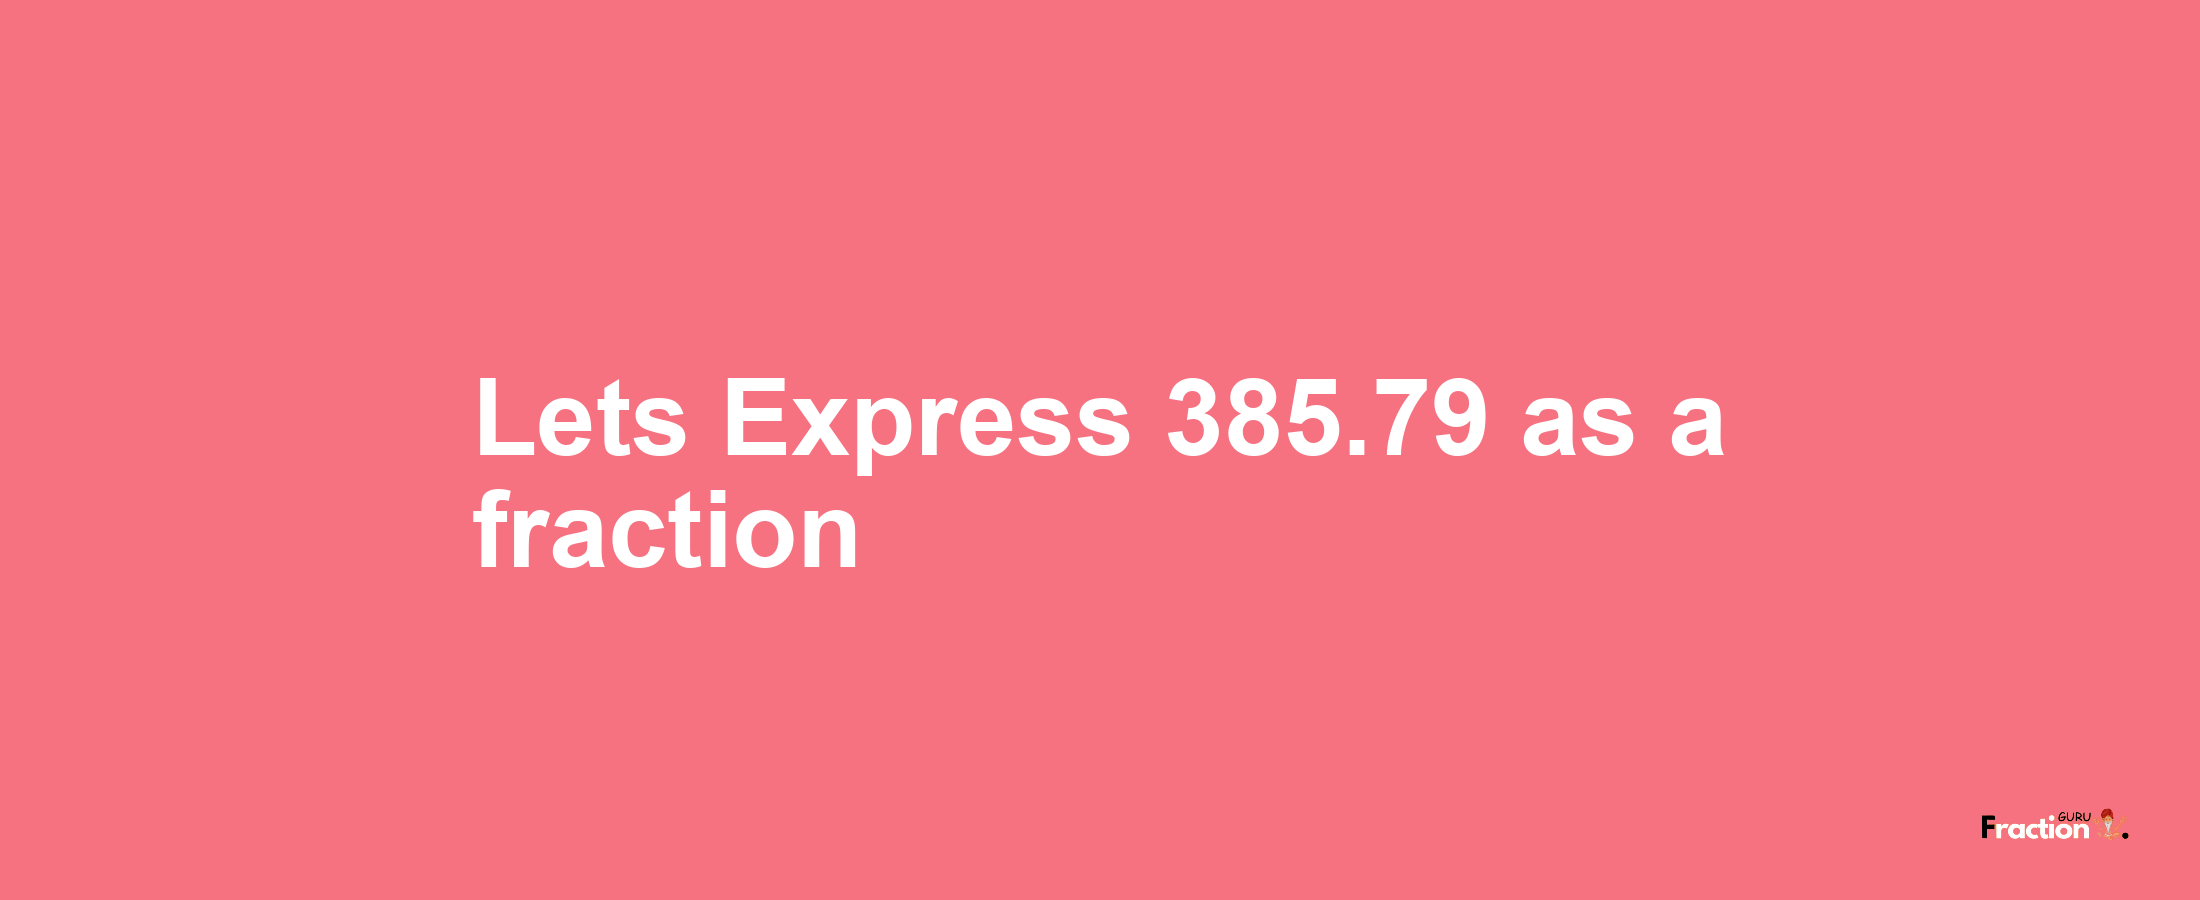 Lets Express 385.79 as afraction